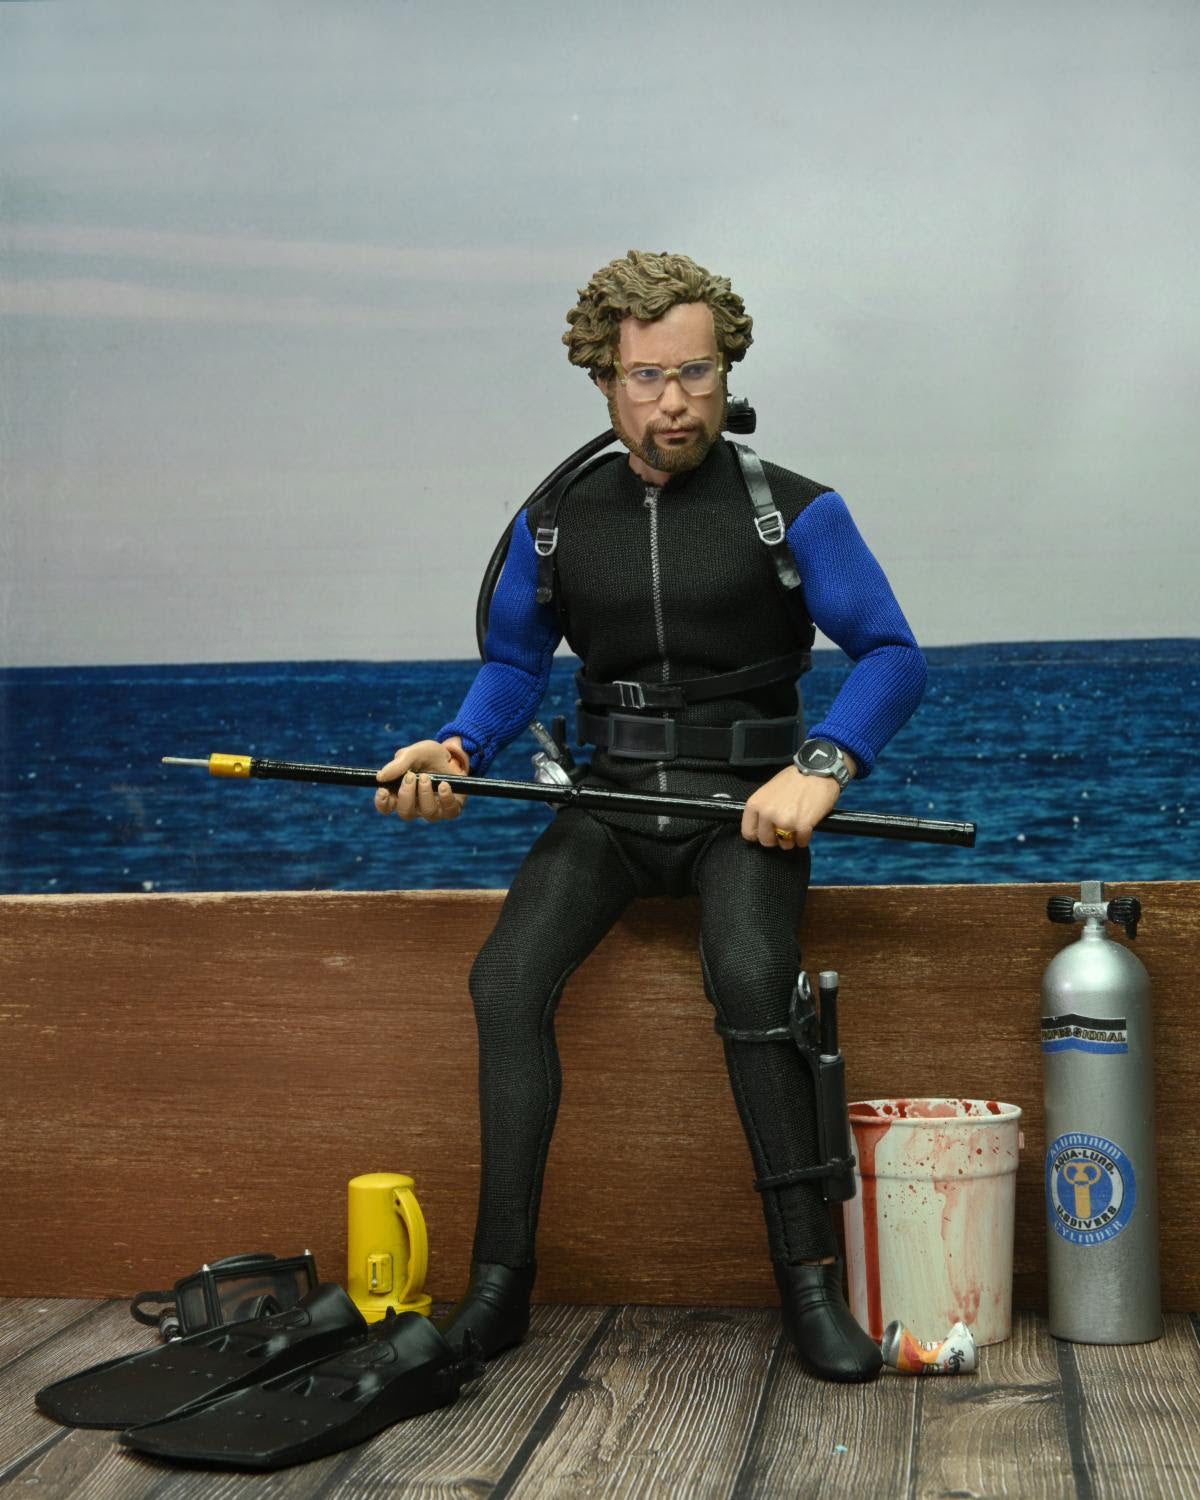 NECA - Jaws - 8" Scale Clothed Figure – Hooper (Shark Cage)